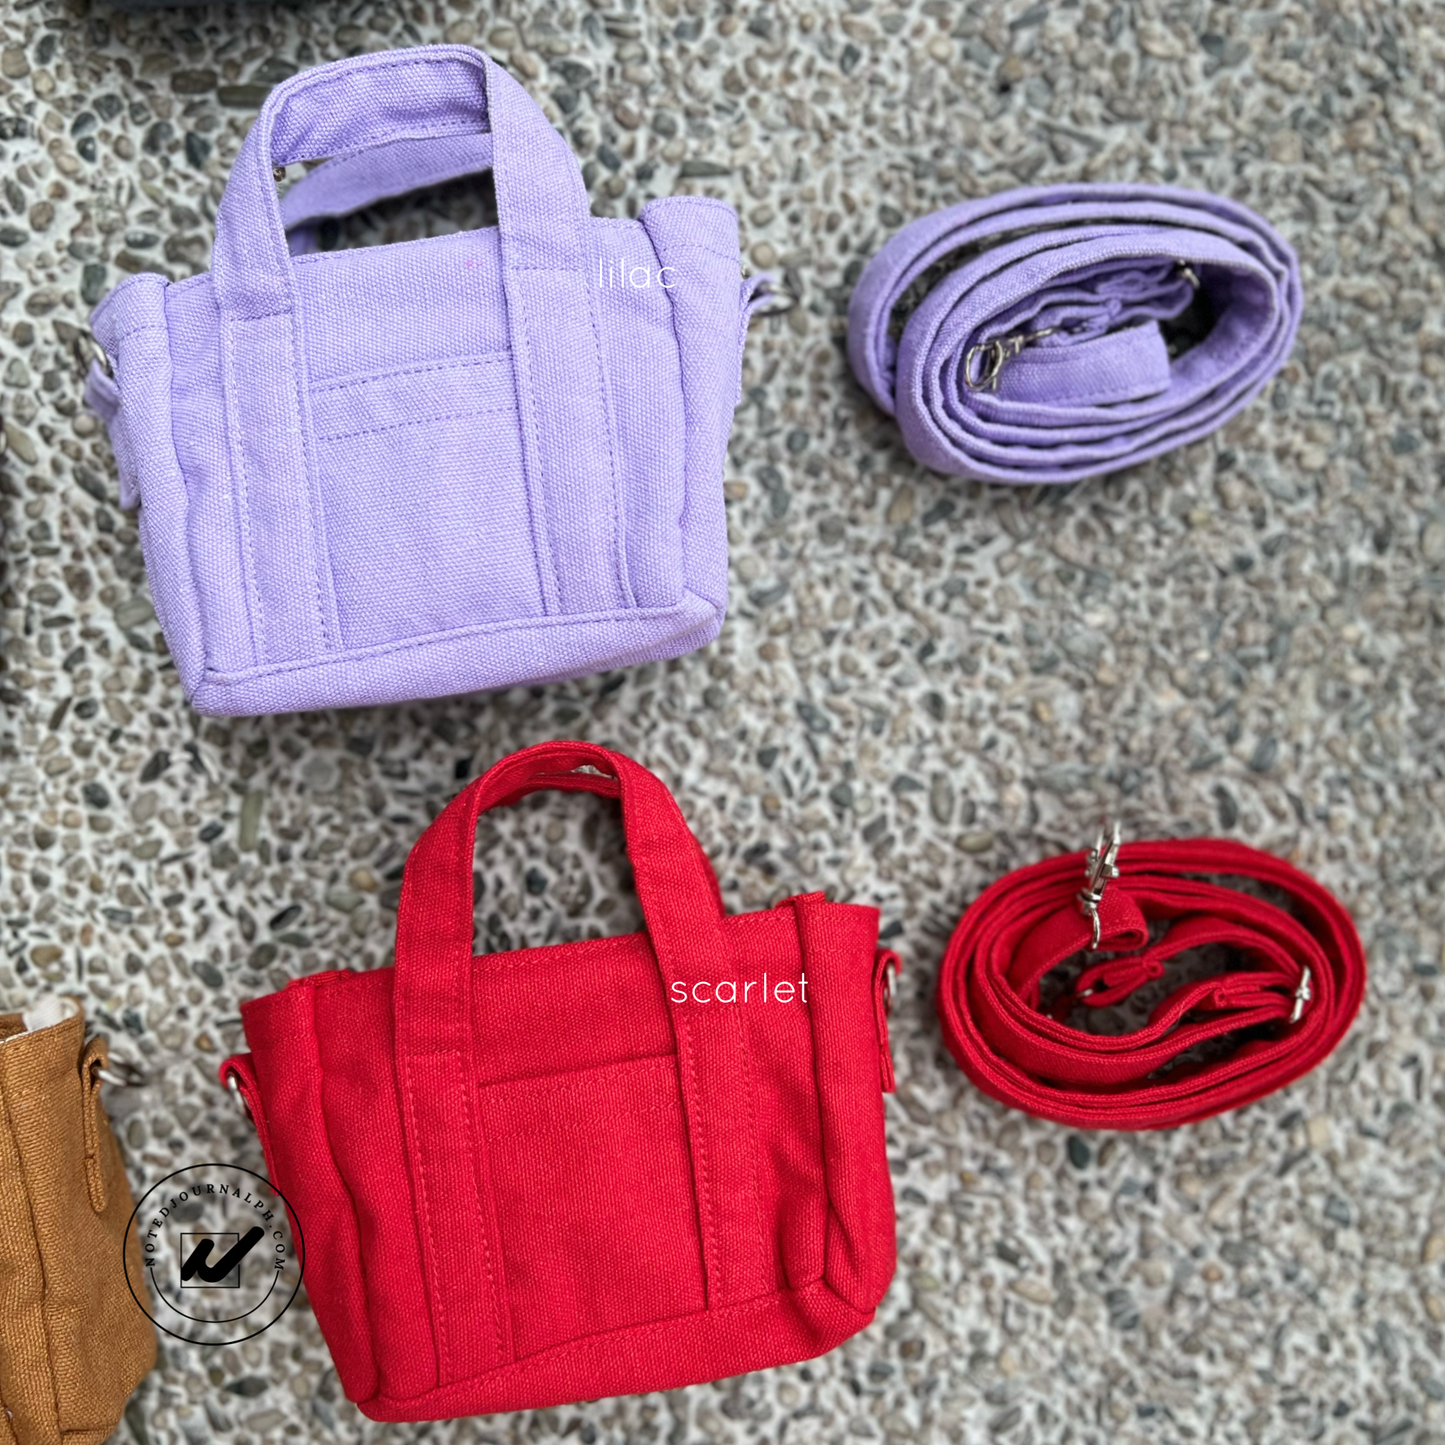 Micro Tote • 2nd edition